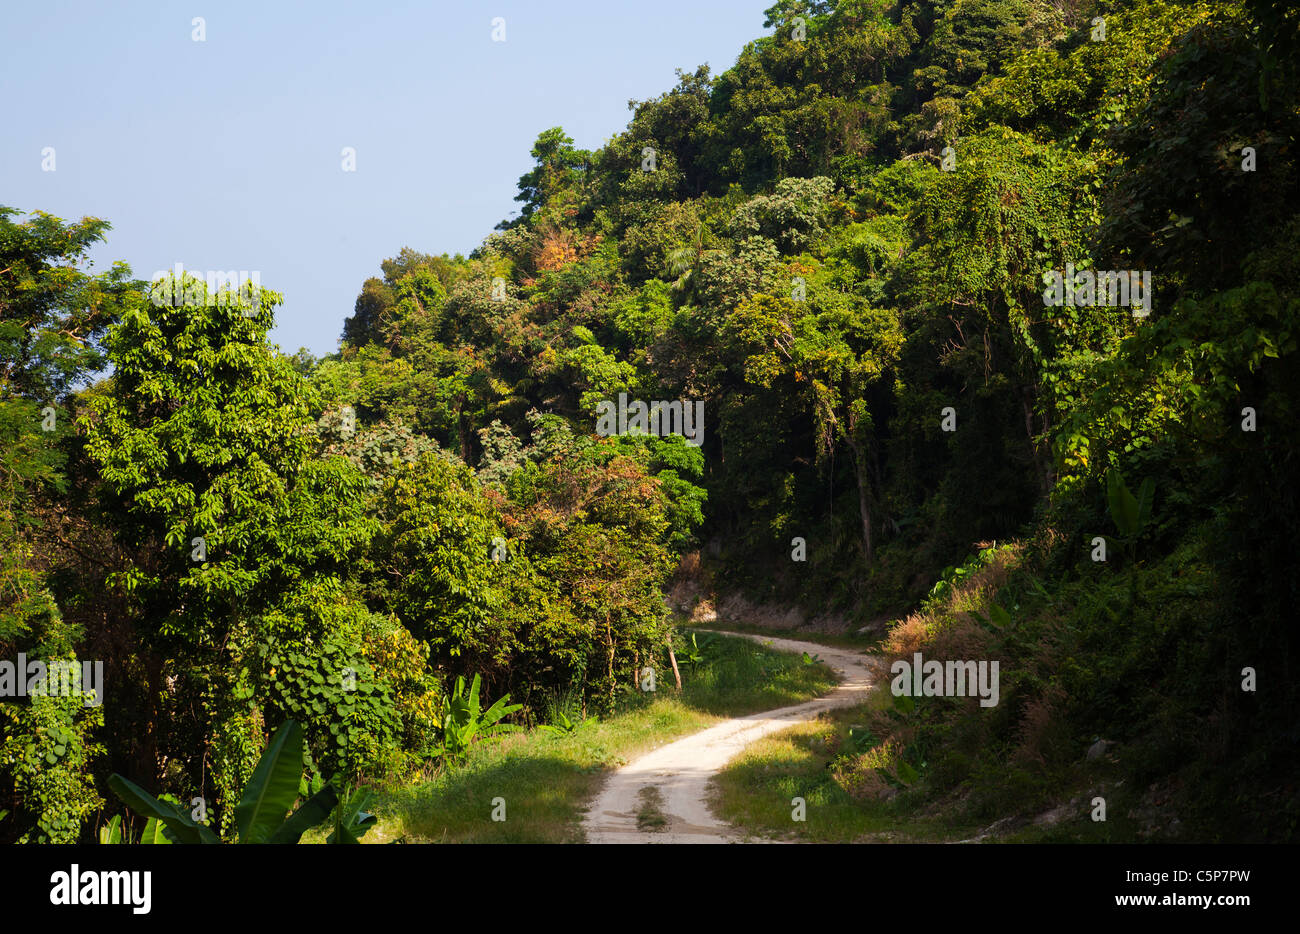 Jungle road road in tropical jungle forest Phuket Thailand Stock Photo